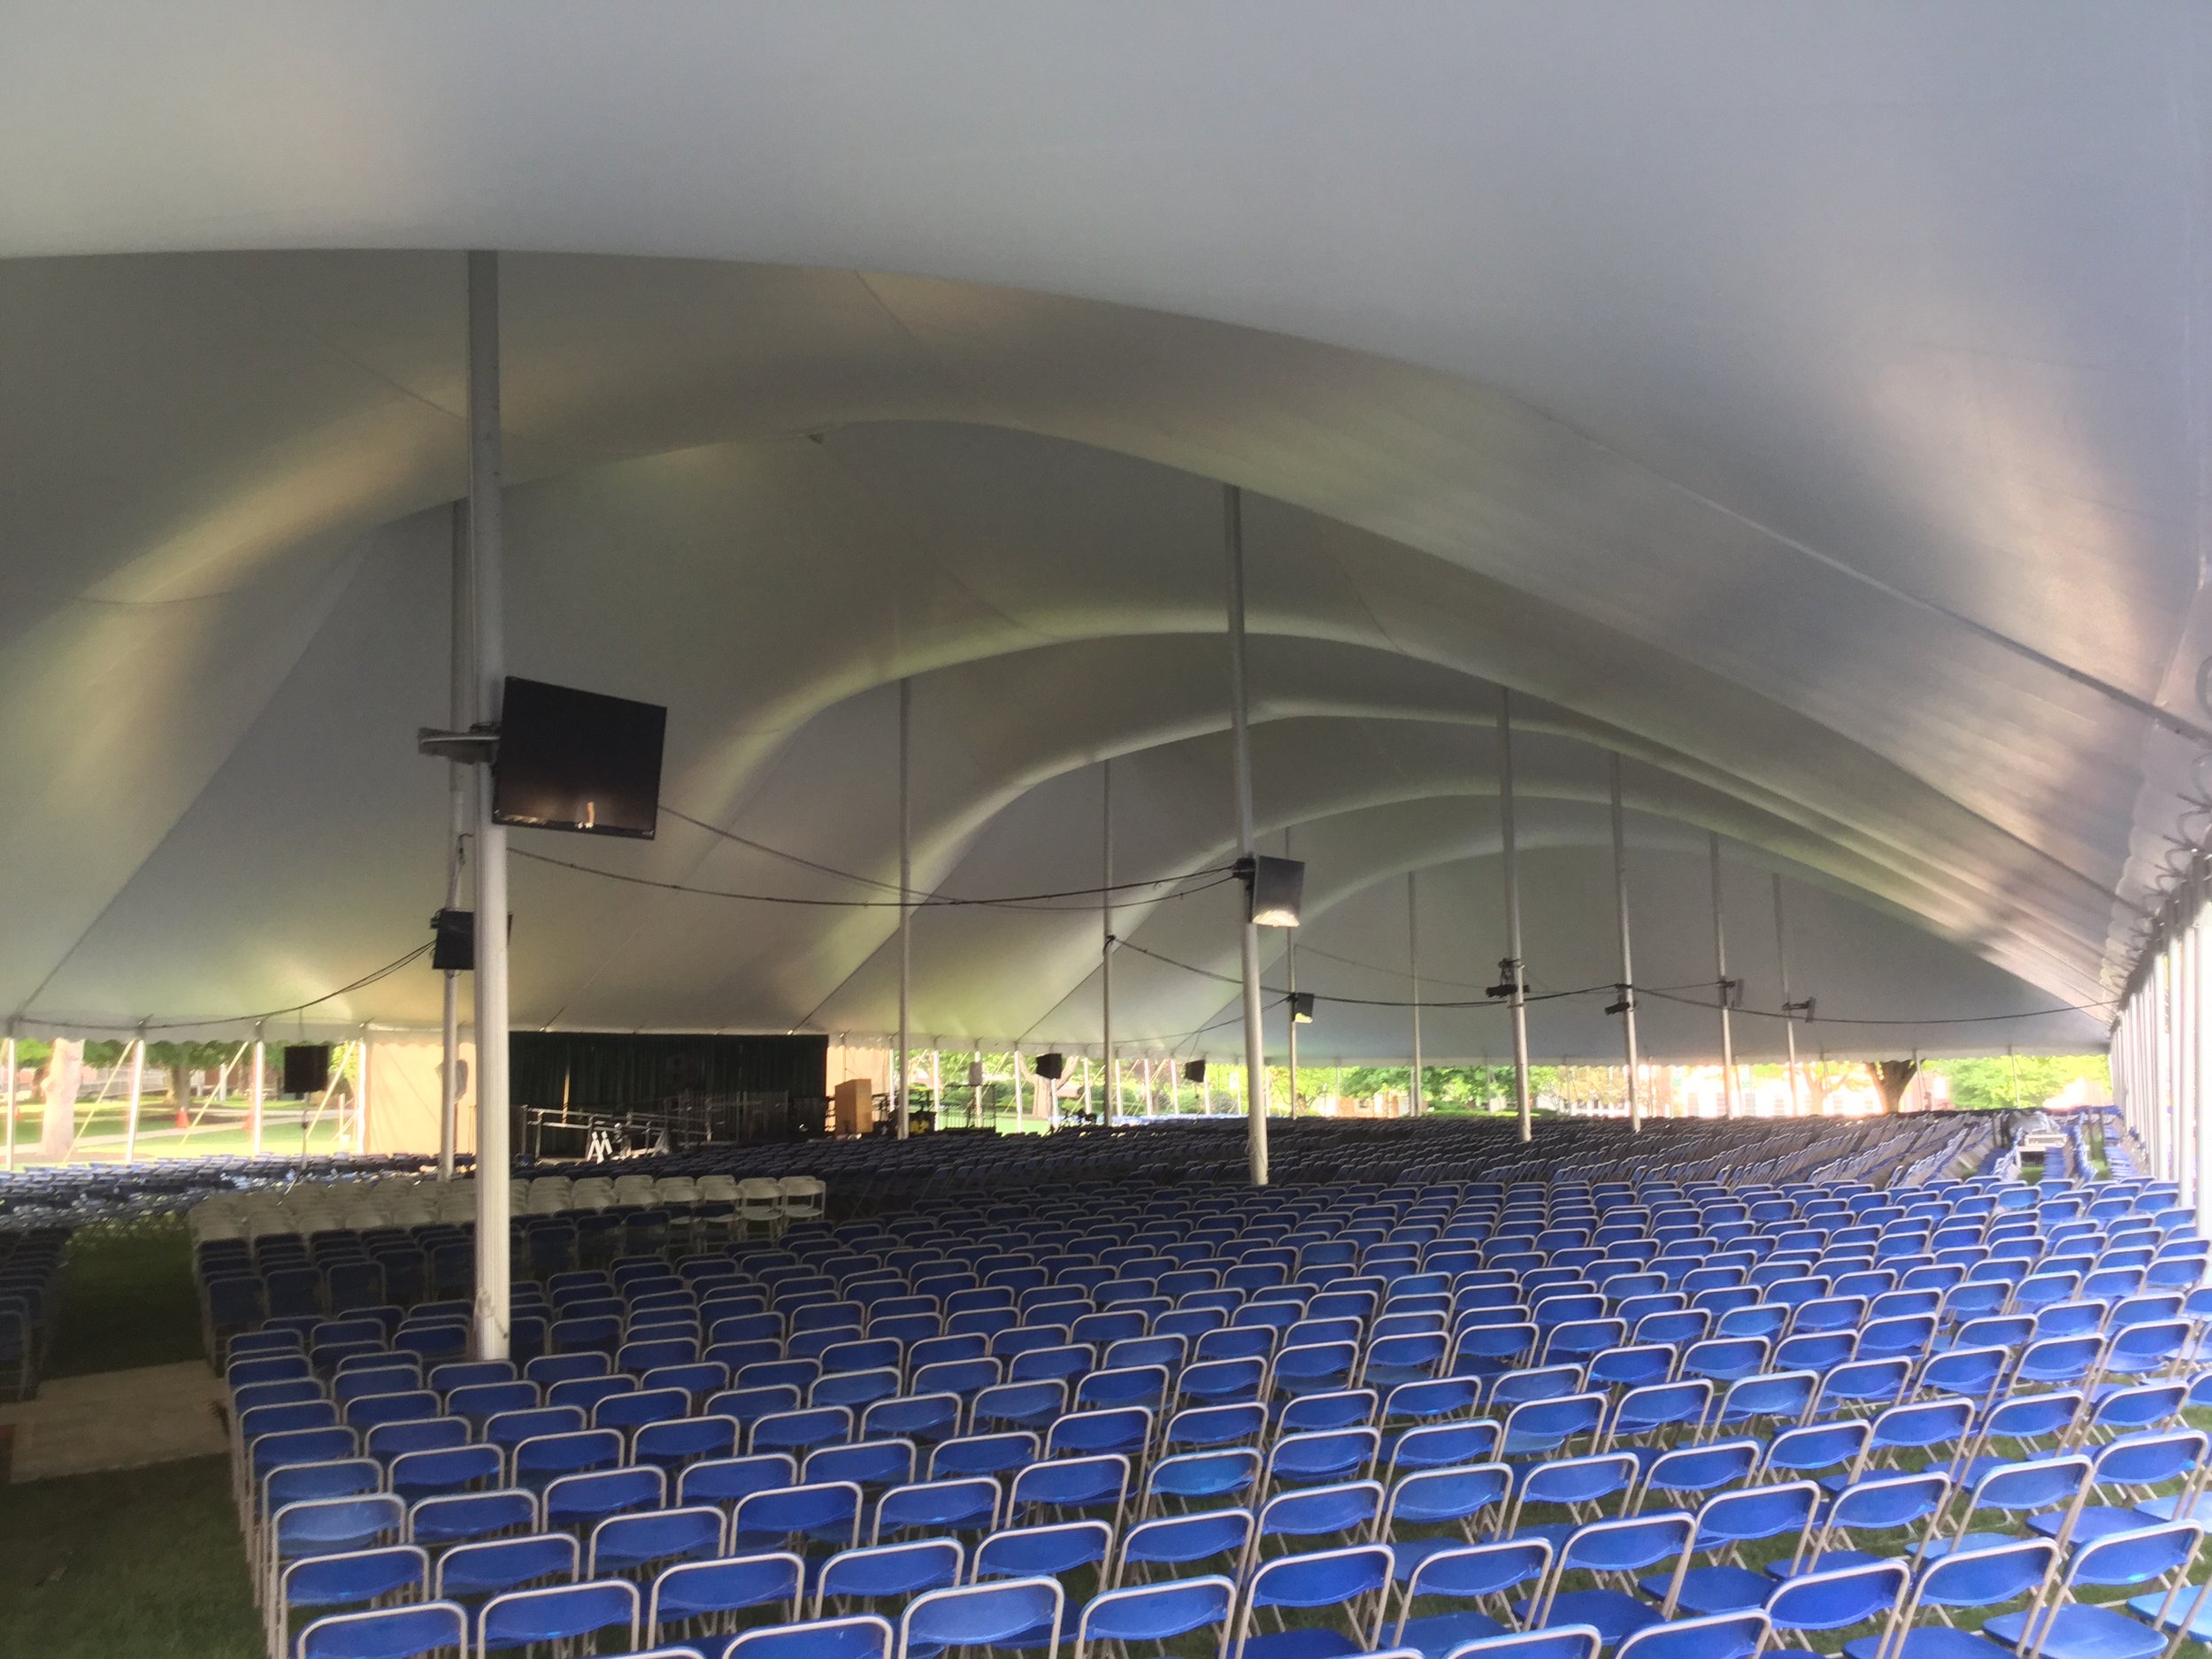 University graduation tent and seating